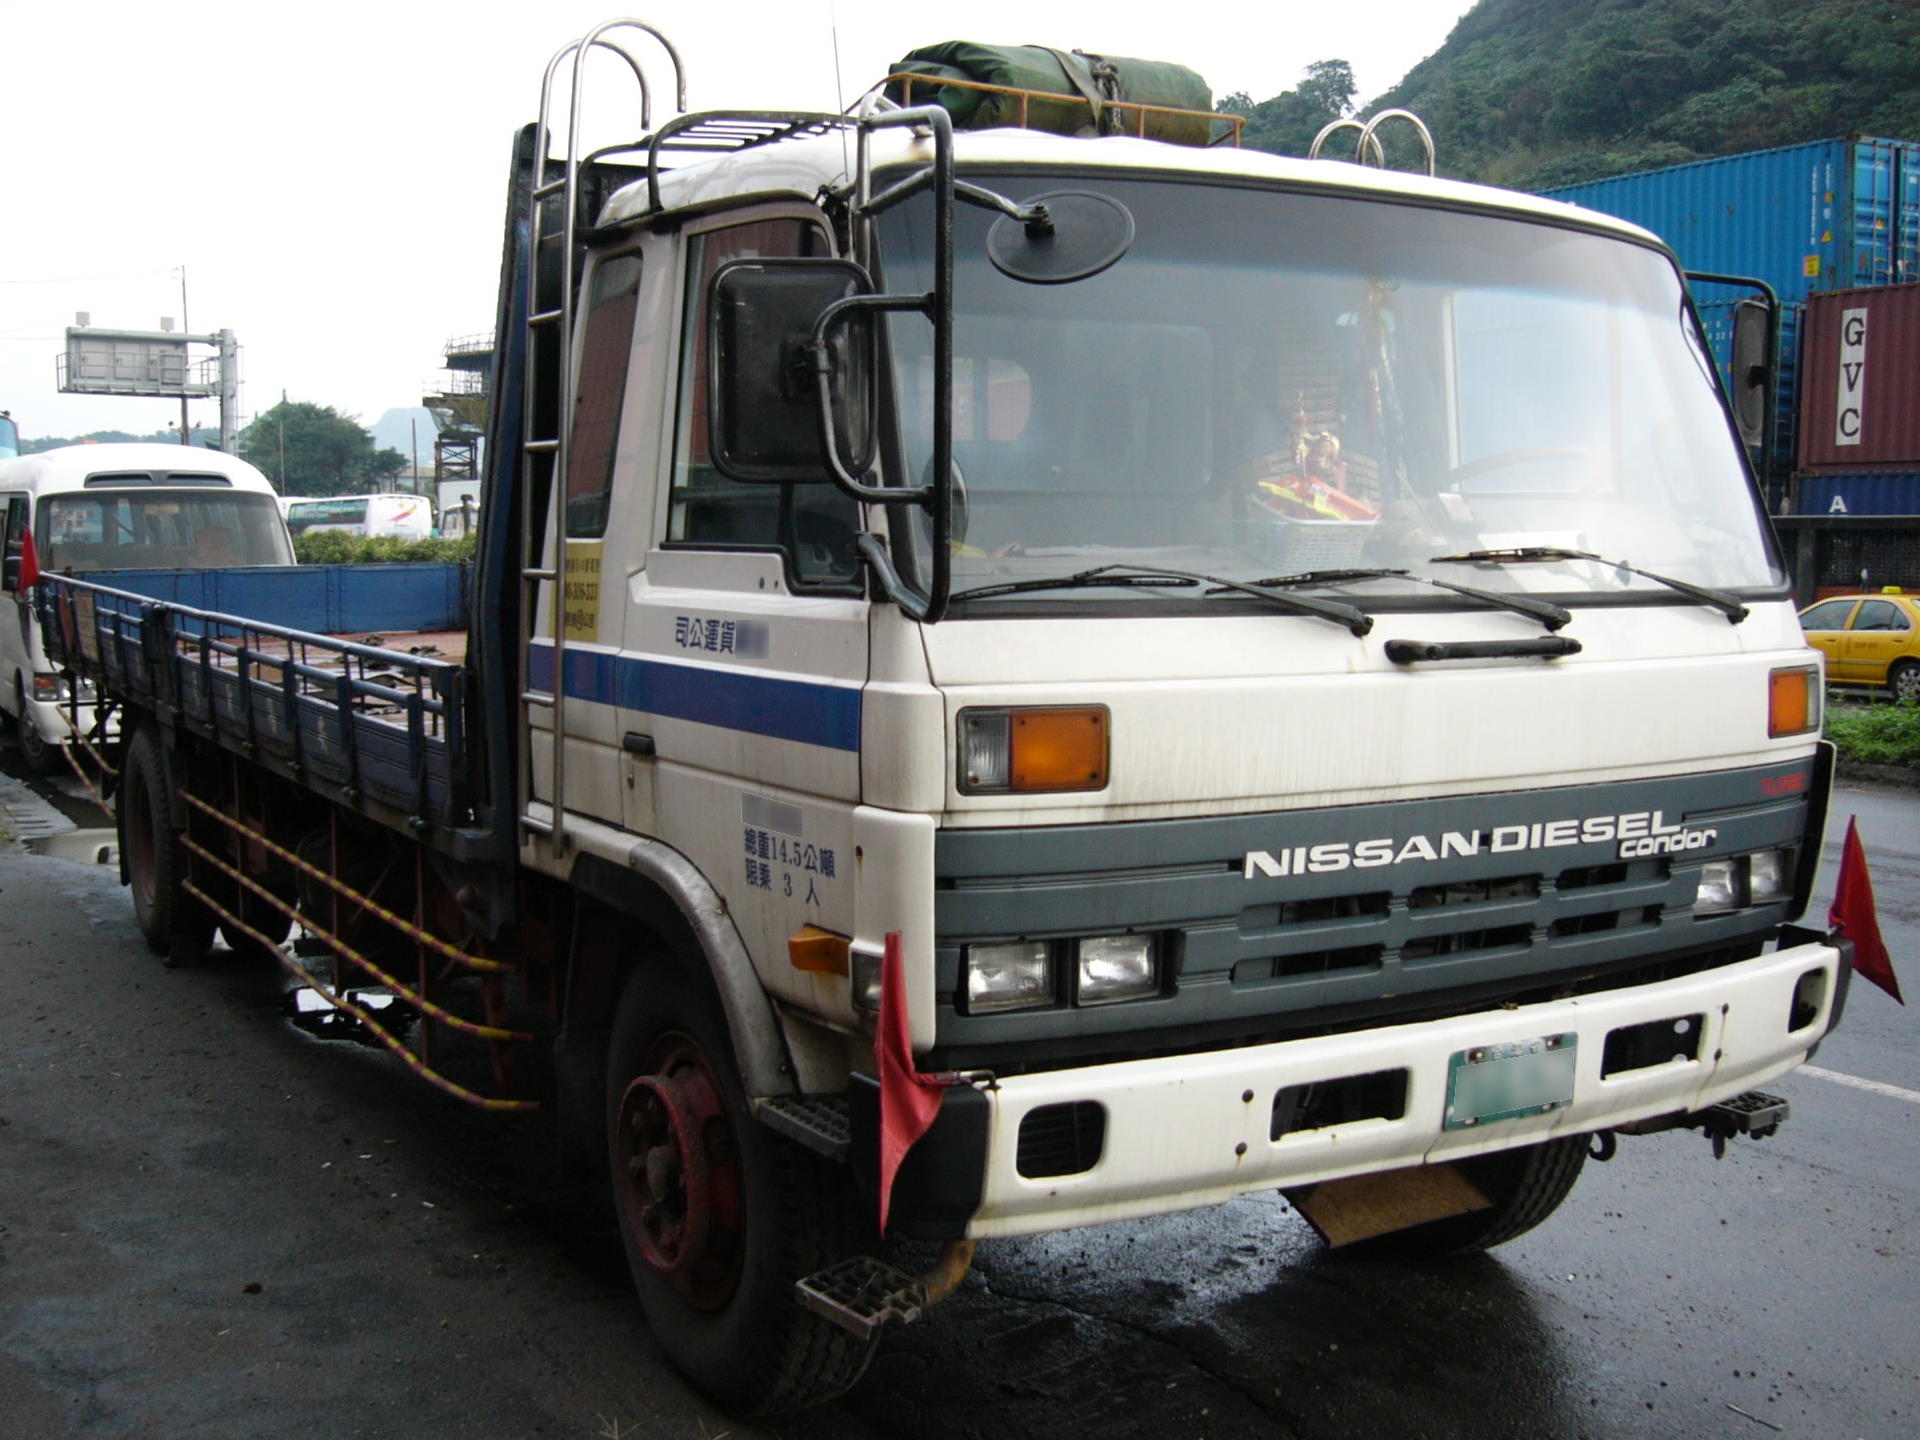 Nissan Diesel Condor 5 Photo Gallery: Photo #09 out of 9, Image ...